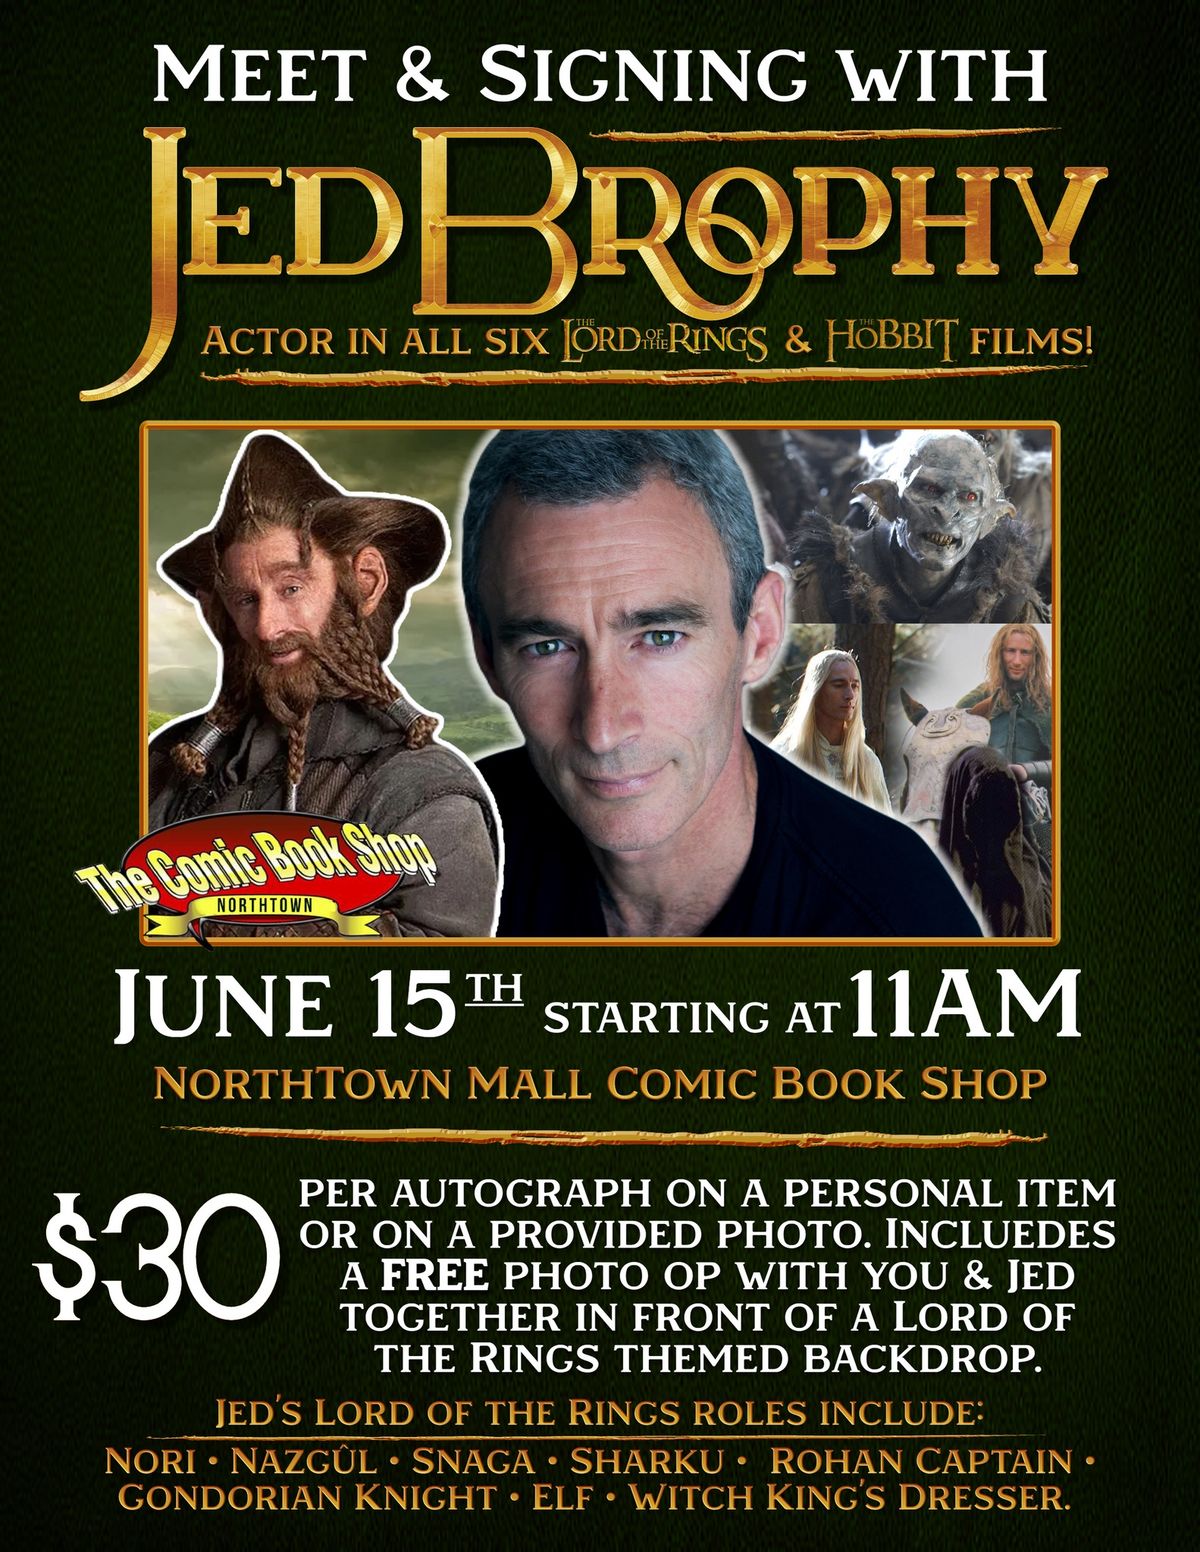 Meet and Signing with Jed Brophy